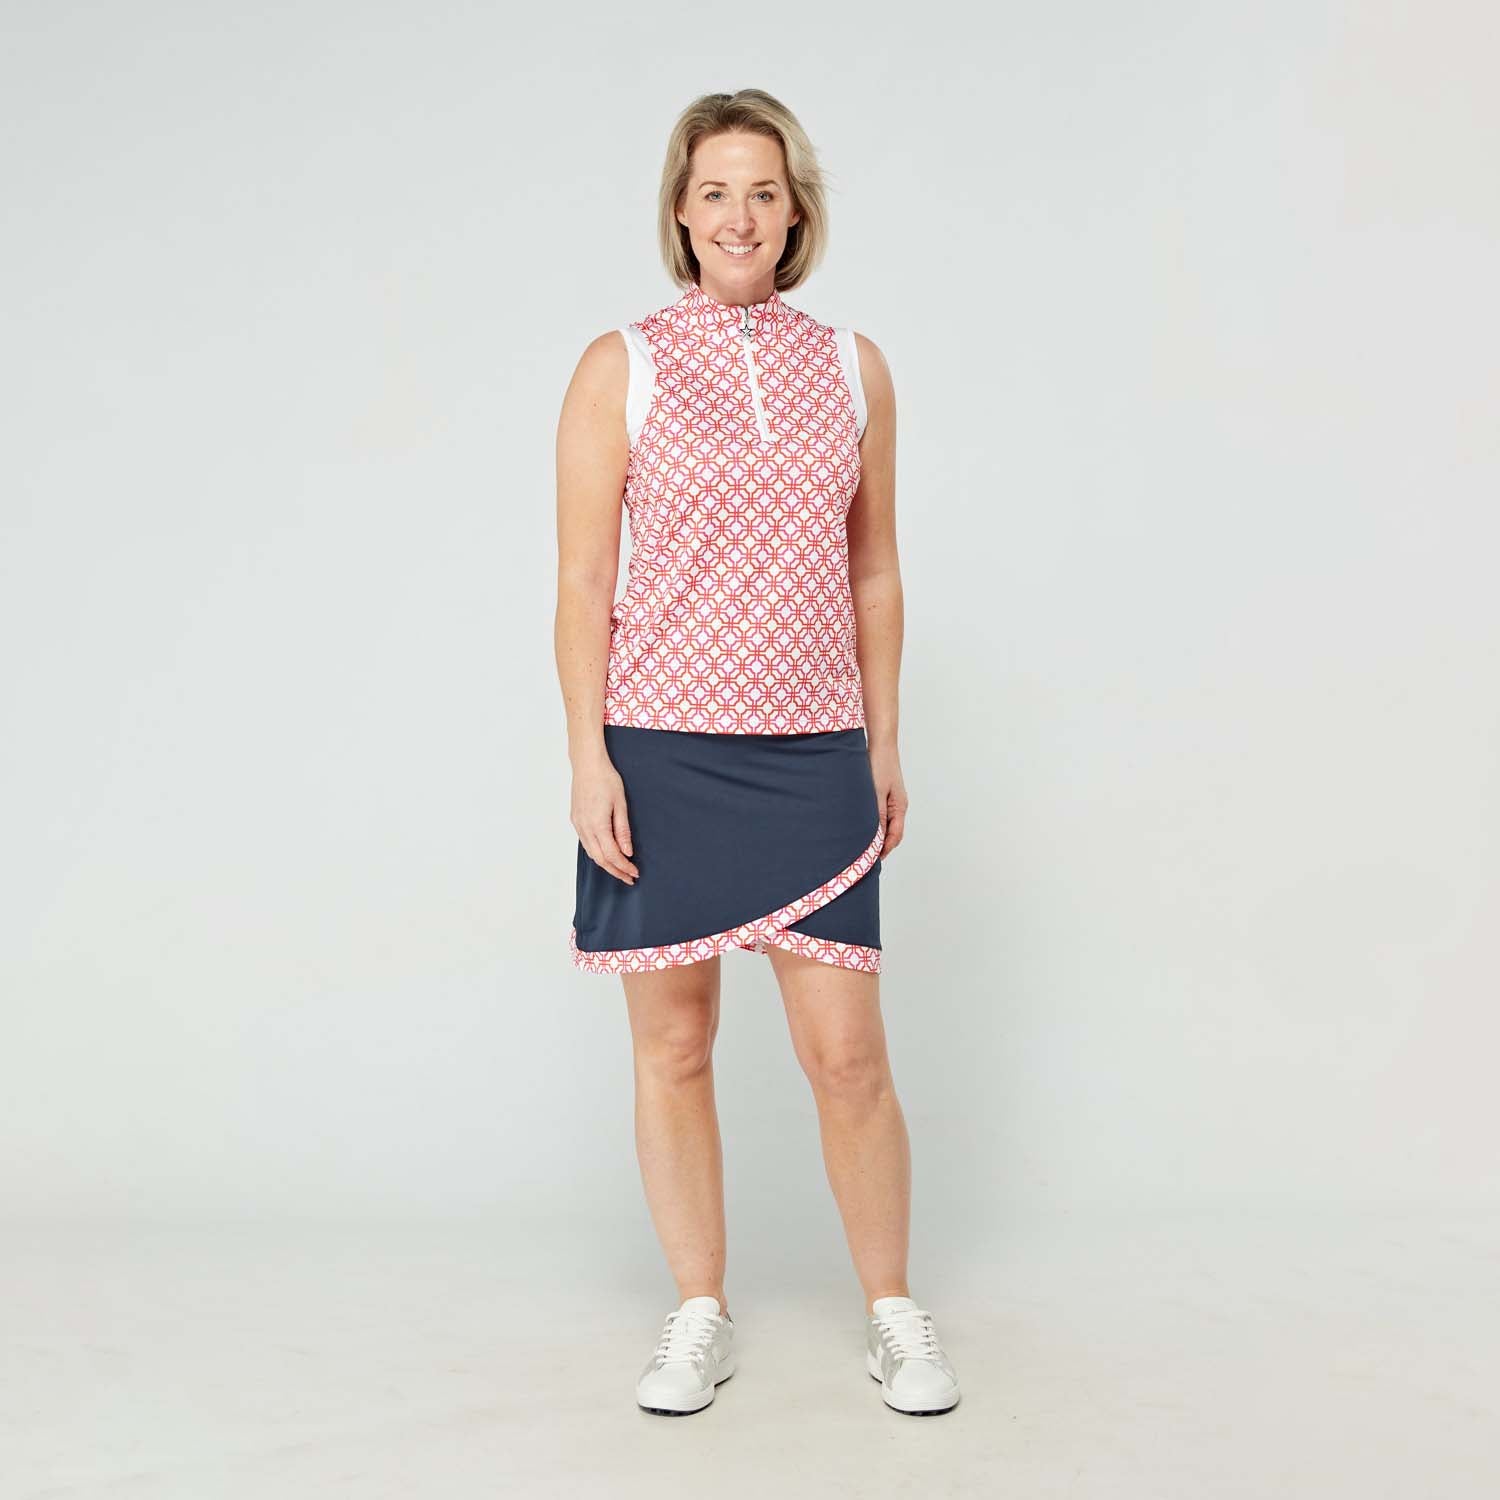 Swing Out Sister Ladies Navy Pull-On Scalloped Skort with Lush Pink and Mandarin Print Trim